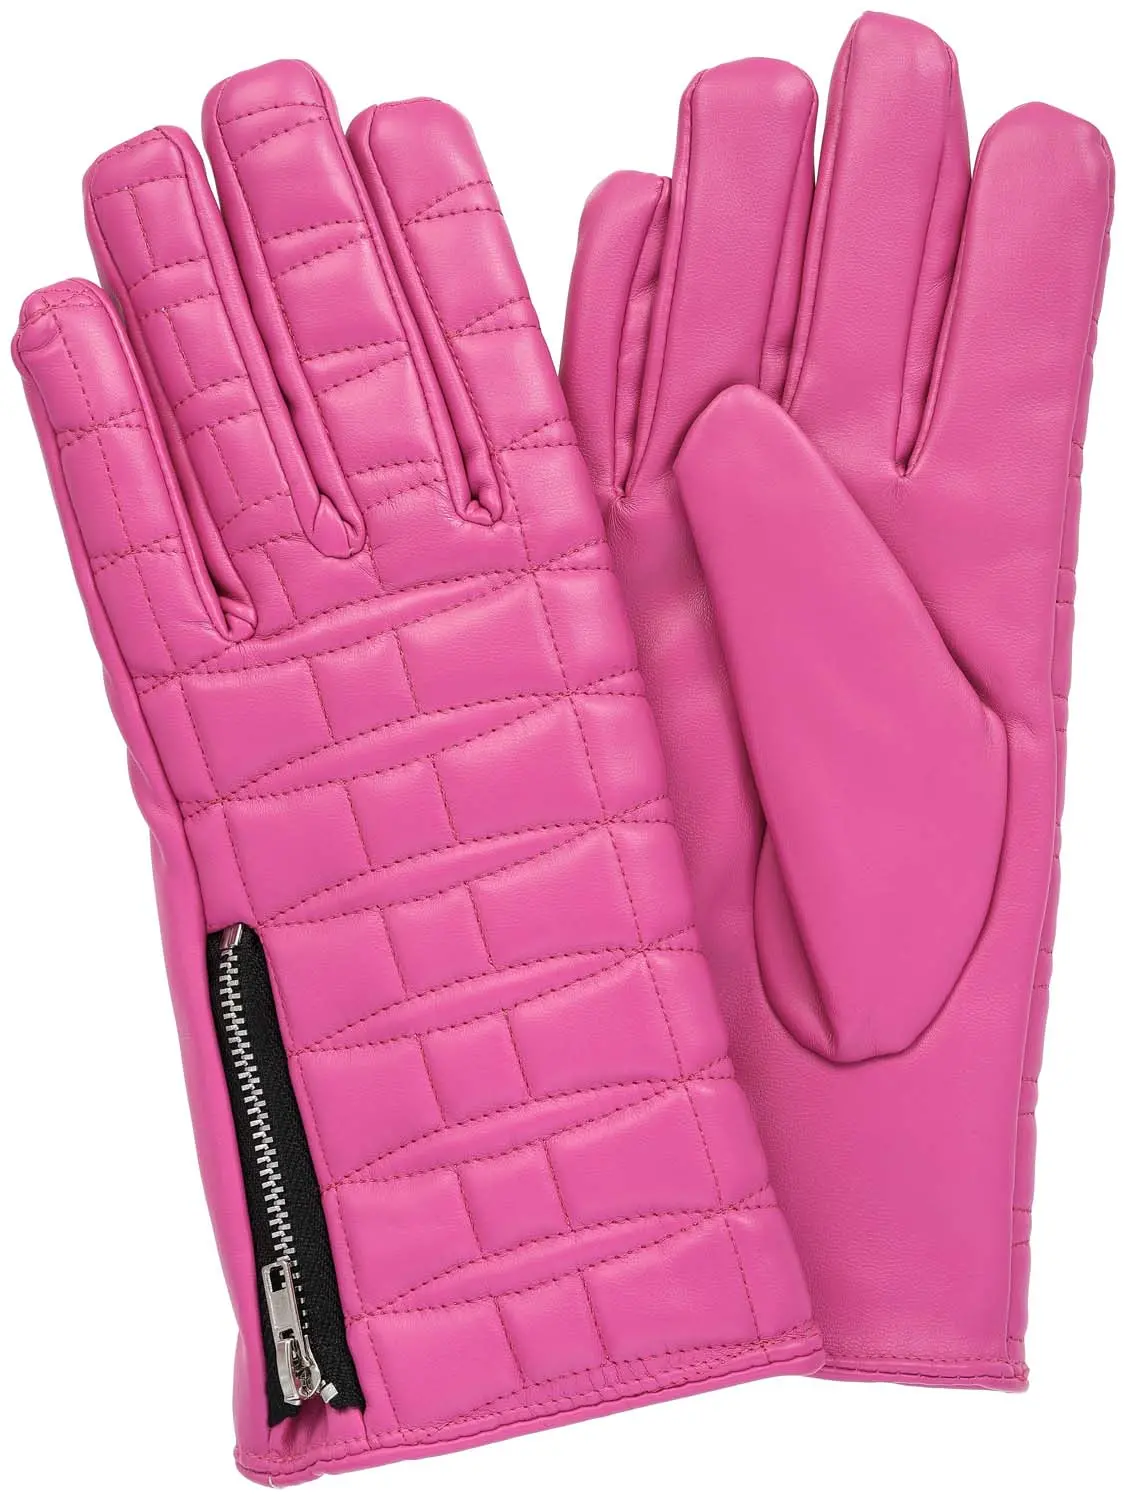 Handschuhe - Pink Leather 